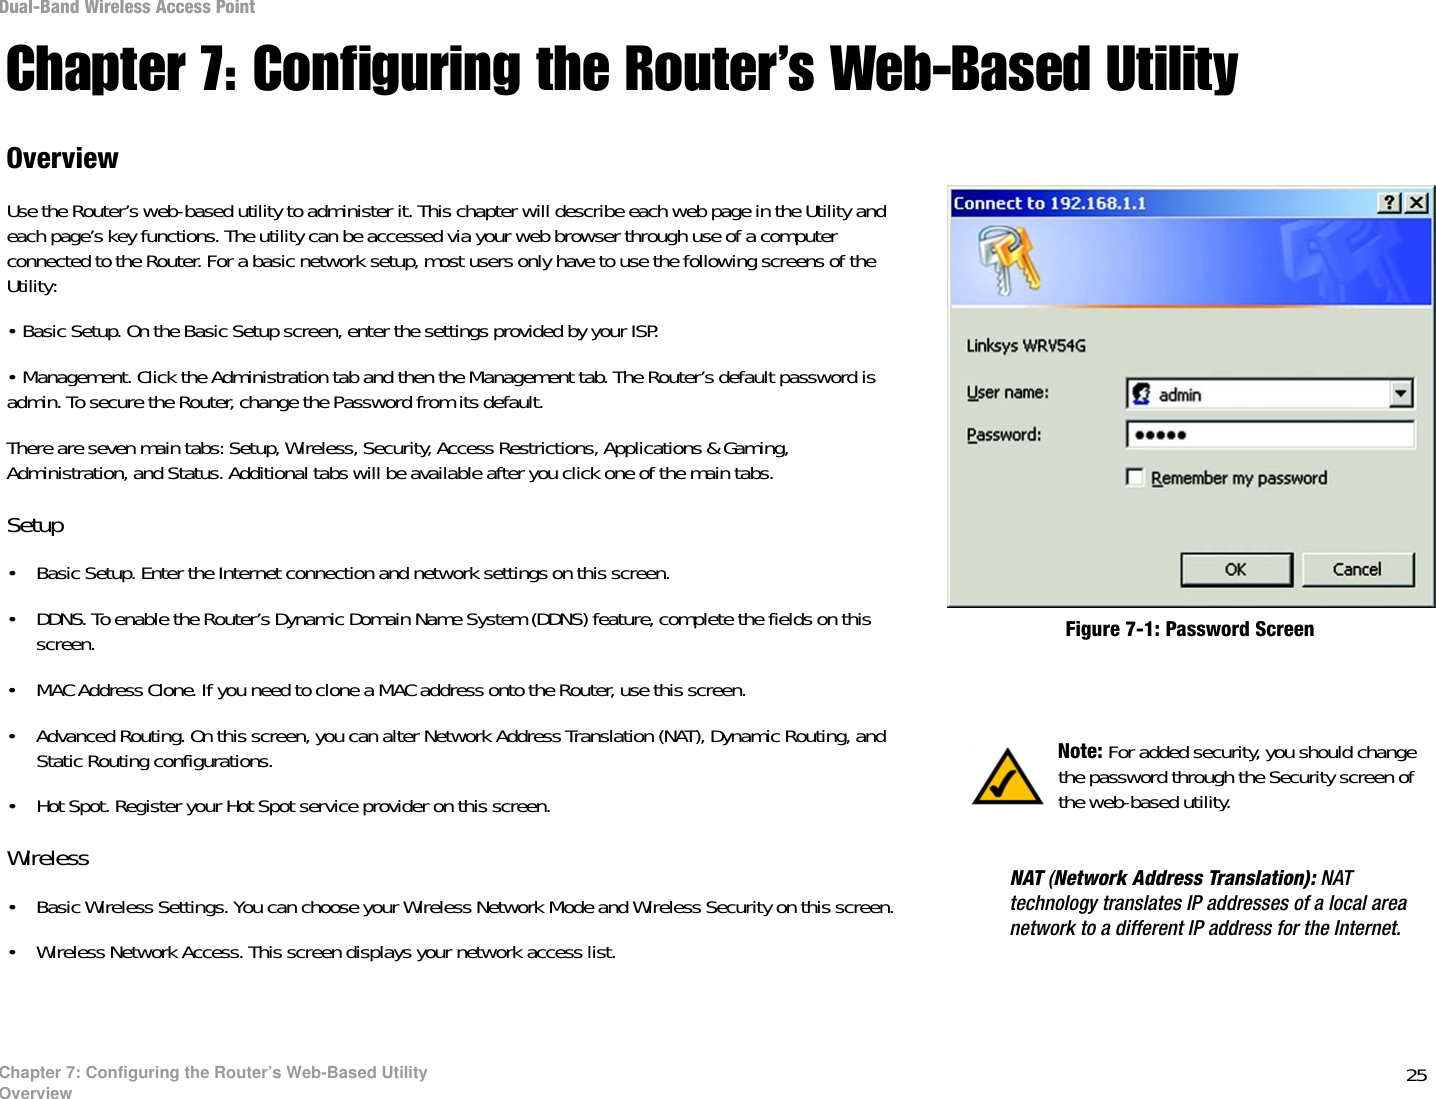 25Chapter 7: Configuring the Router’s Web-Based UtilityOverviewDual-Band Wireless Access PointChapter 7: Configuring the Router’s Web-Based UtilityOverviewUse the Router’s web-based utility to administer it. This chapter will describe each web page in the Utility and each page’s key functions. The utility can be accessed via your web browser through use of a computer connected to the Router. For a basic network setup, most users only have to use the following screens of the Utility:• Basic Setup. On the Basic Setup screen, enter the settings provided by your ISP.• Management. Click the Administration tab and then the Management tab. The Router’s default password is admin. To secure the Router, change the Password from its default.There are seven main tabs: Setup, Wireless, Security, Access Restrictions, Applications &amp; Gaming, Administration, and Status. Additional tabs will be available after you click one of the main tabs.Setup• Basic Setup. Enter the Internet connection and network settings on this screen.• DDNS. To enable the Router’s Dynamic Domain Name System (DDNS) feature, complete the fields on this screen.• MAC Address Clone. If you need to clone a MAC address onto the Router, use this screen.• Advanced Routing. On this screen, you can alter Network Address Translation (NAT), Dynamic Routing, and Static Routing configurations.• Hot Spot. Register your Hot Spot service provider on this screen.Wireless• Basic Wireless Settings. You can choose your Wireless Network Mode and Wireless Security on this screen.• Wireless Network Access. This screen displays your network access list. Note: For added security, you should change the password through the Security screen of the web-based utility.Figure 7-1: Password ScreenNAT (Network Address Translation): NAT technology translates IP addresses of a local area network to a different IP address for the Internet. 